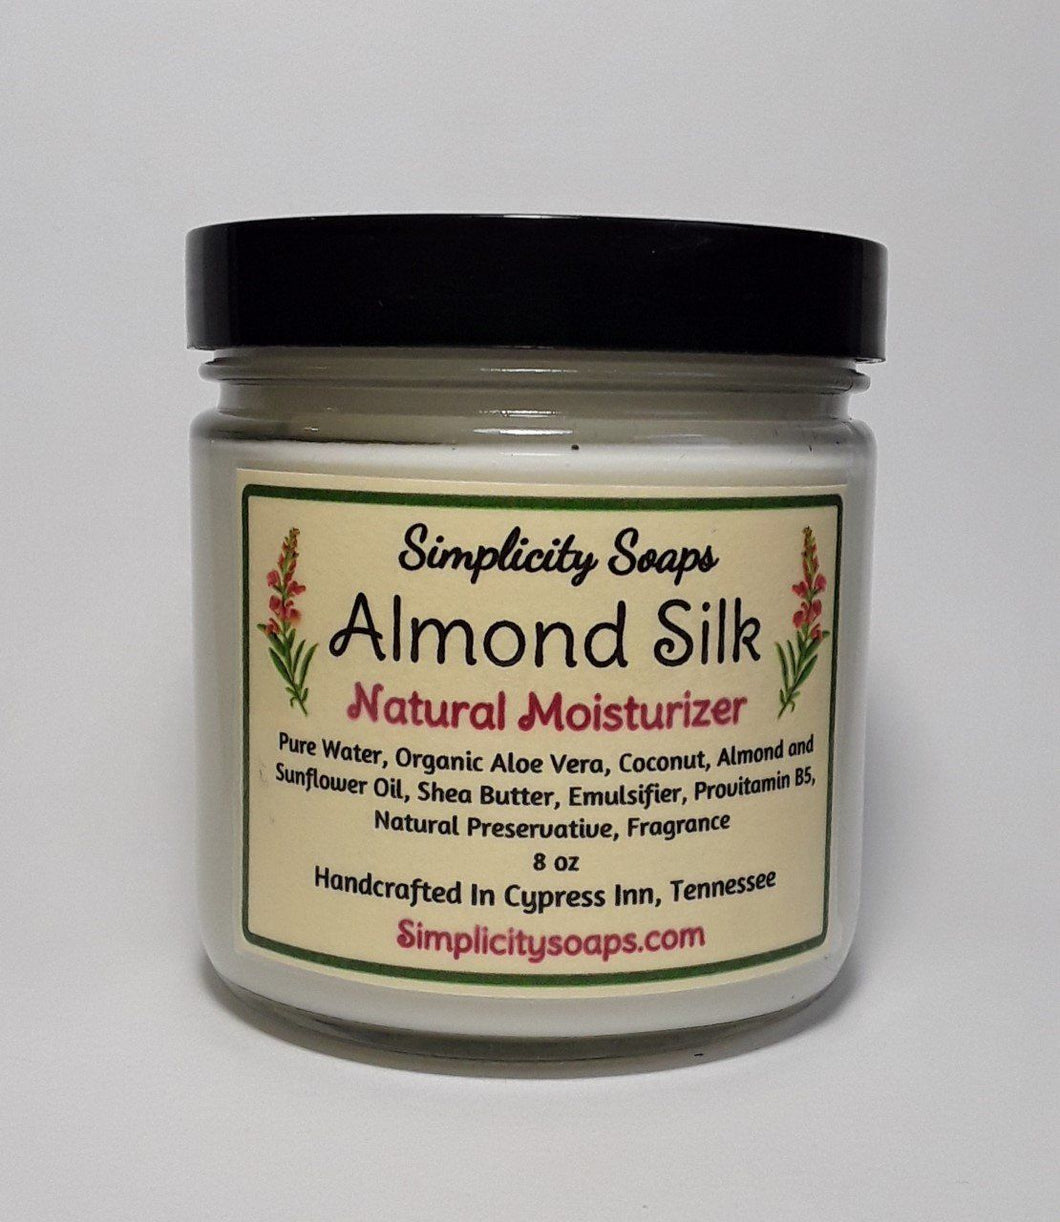 Natural moisturizing lotion - Almond Silk, Body lotion without chemicals, handmade lotion, vegan lotion recpie, lotion formula,